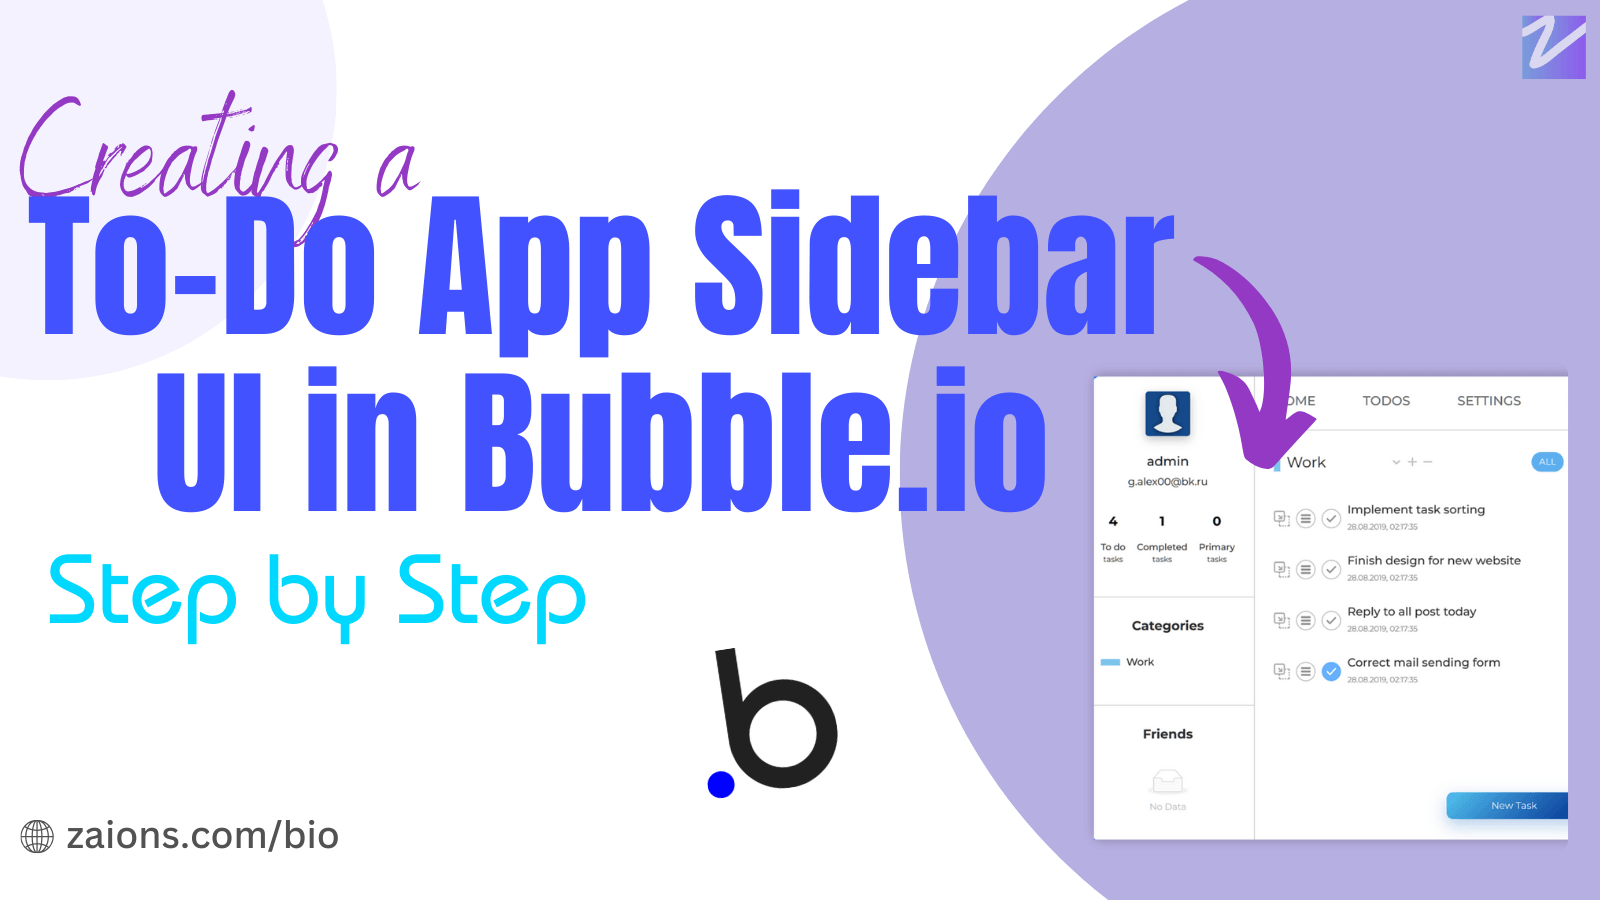 creating-a-to-do-app-sidebar-ui-in-bubble.io-step-by-step-zaions-aoneahsan